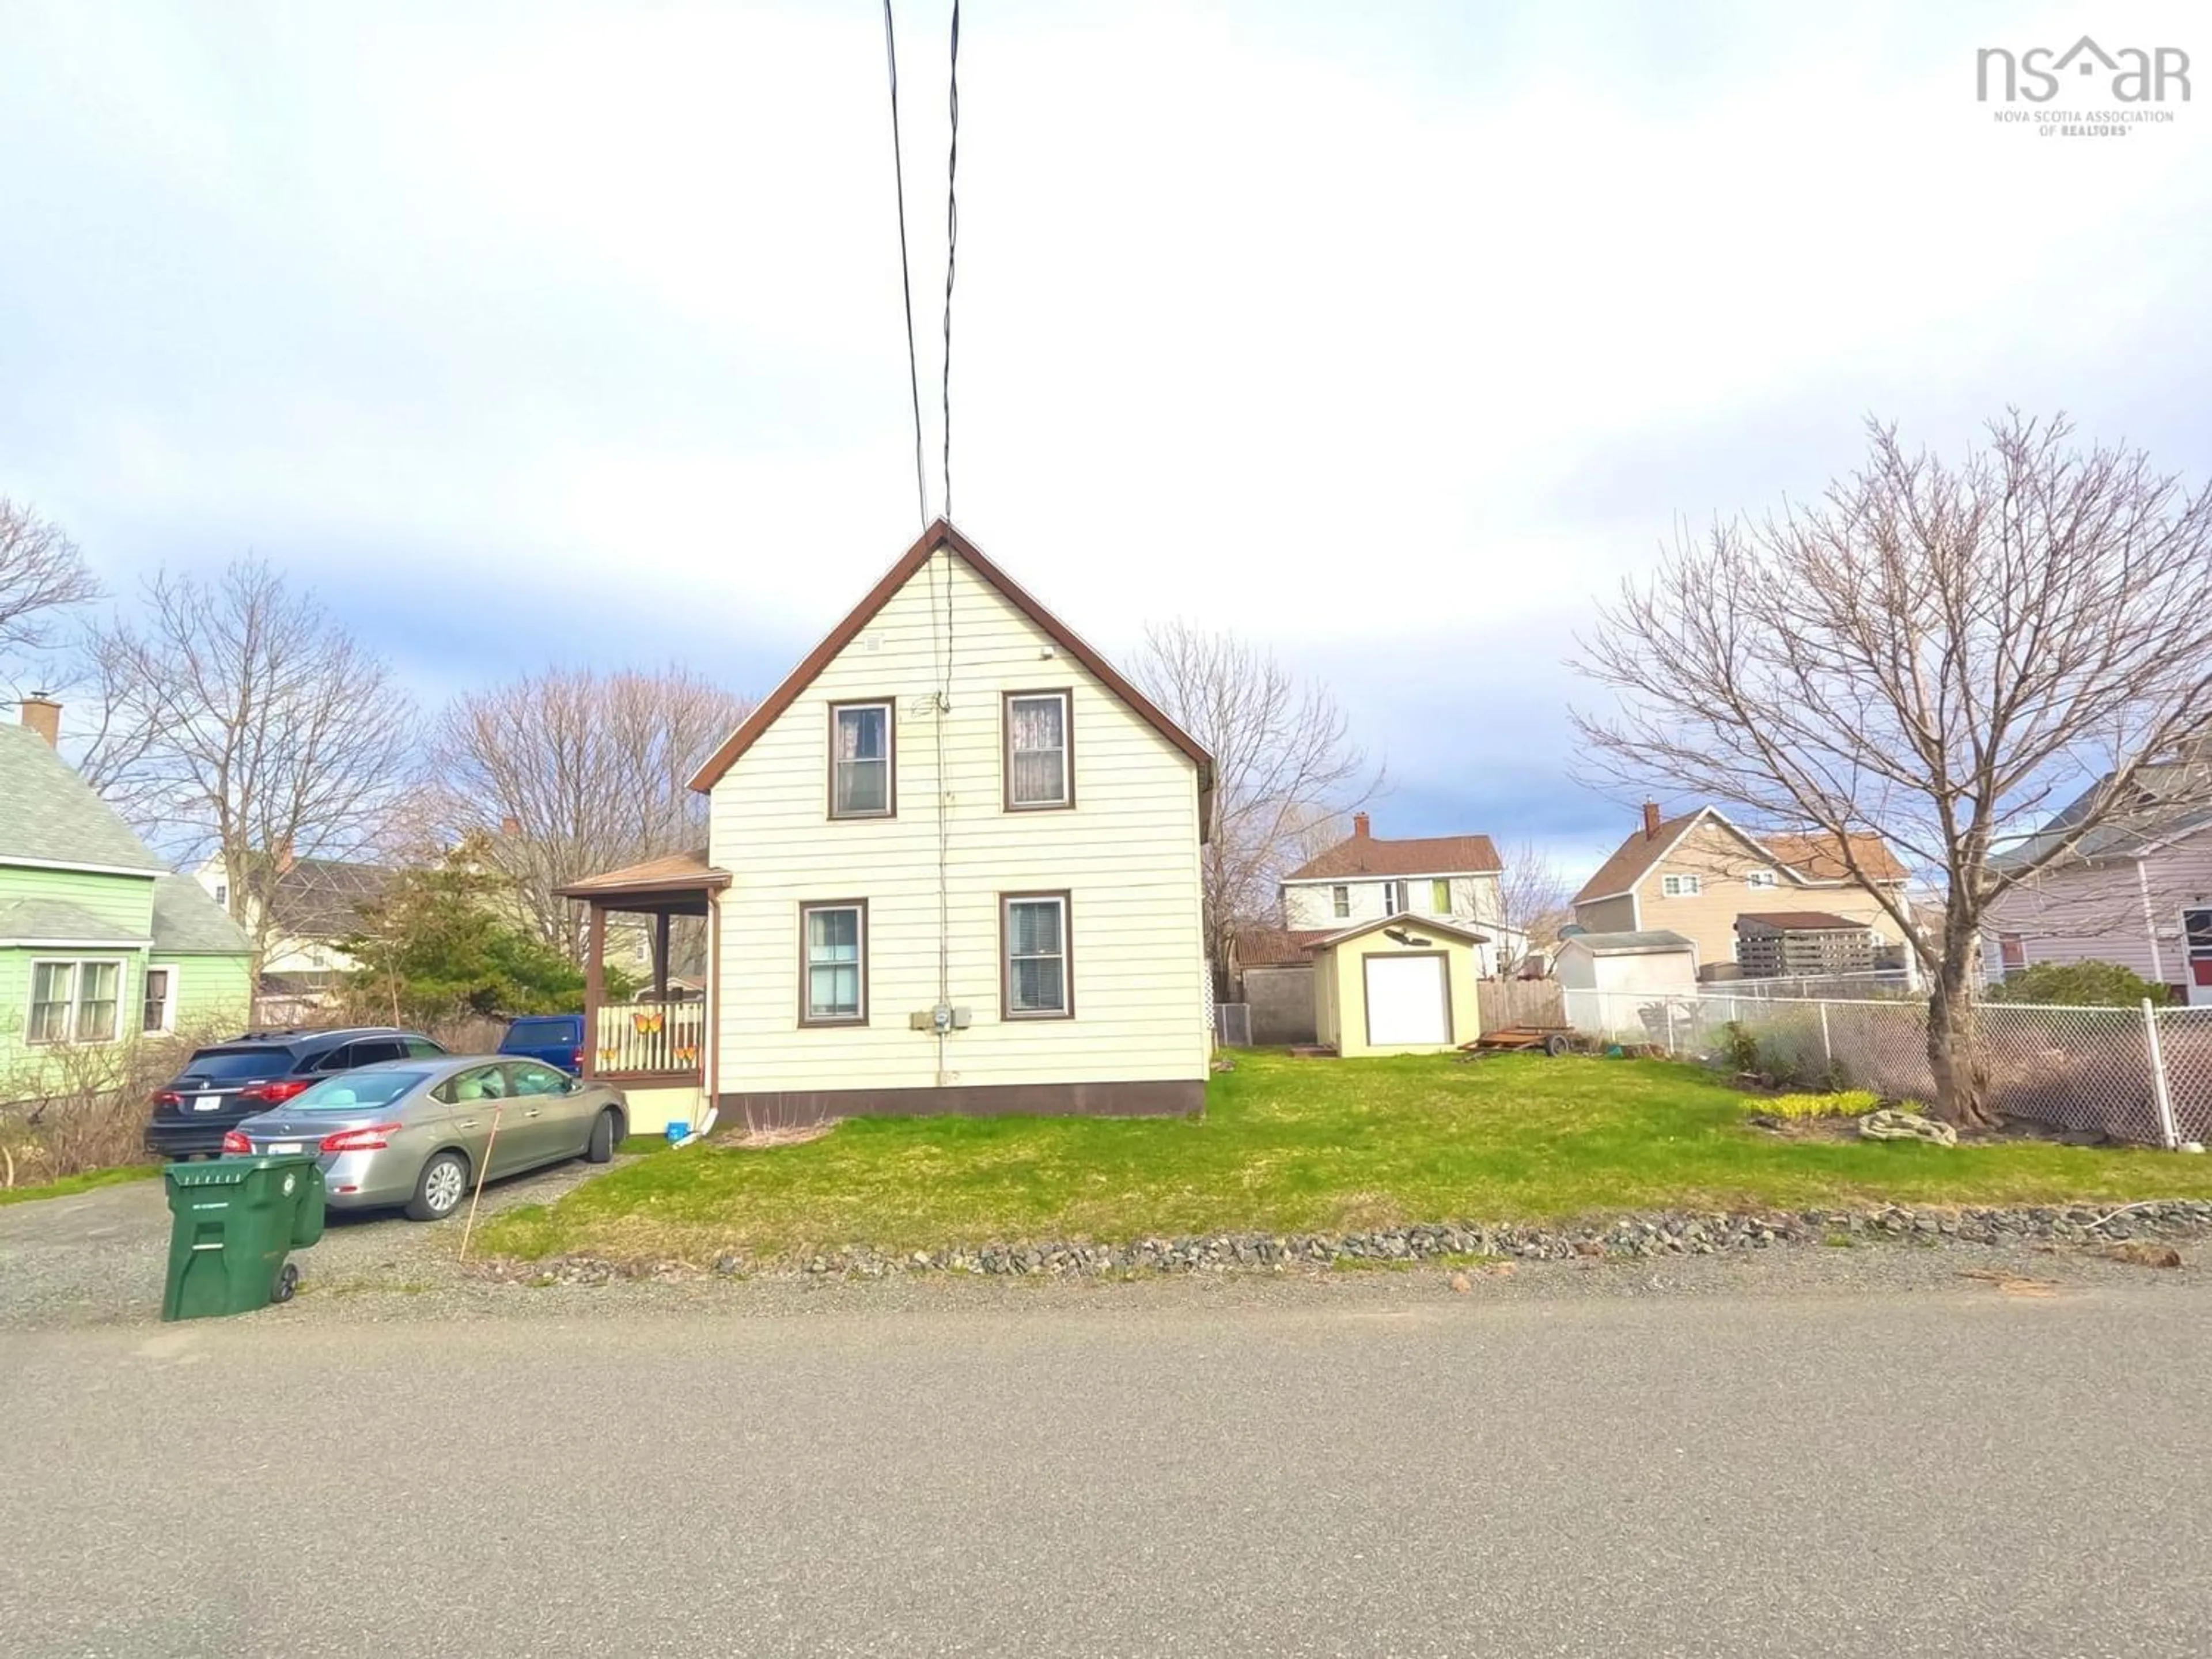 Street view for 47 Lower Mclean St, Glace Bay Nova Scotia B1A 2K5